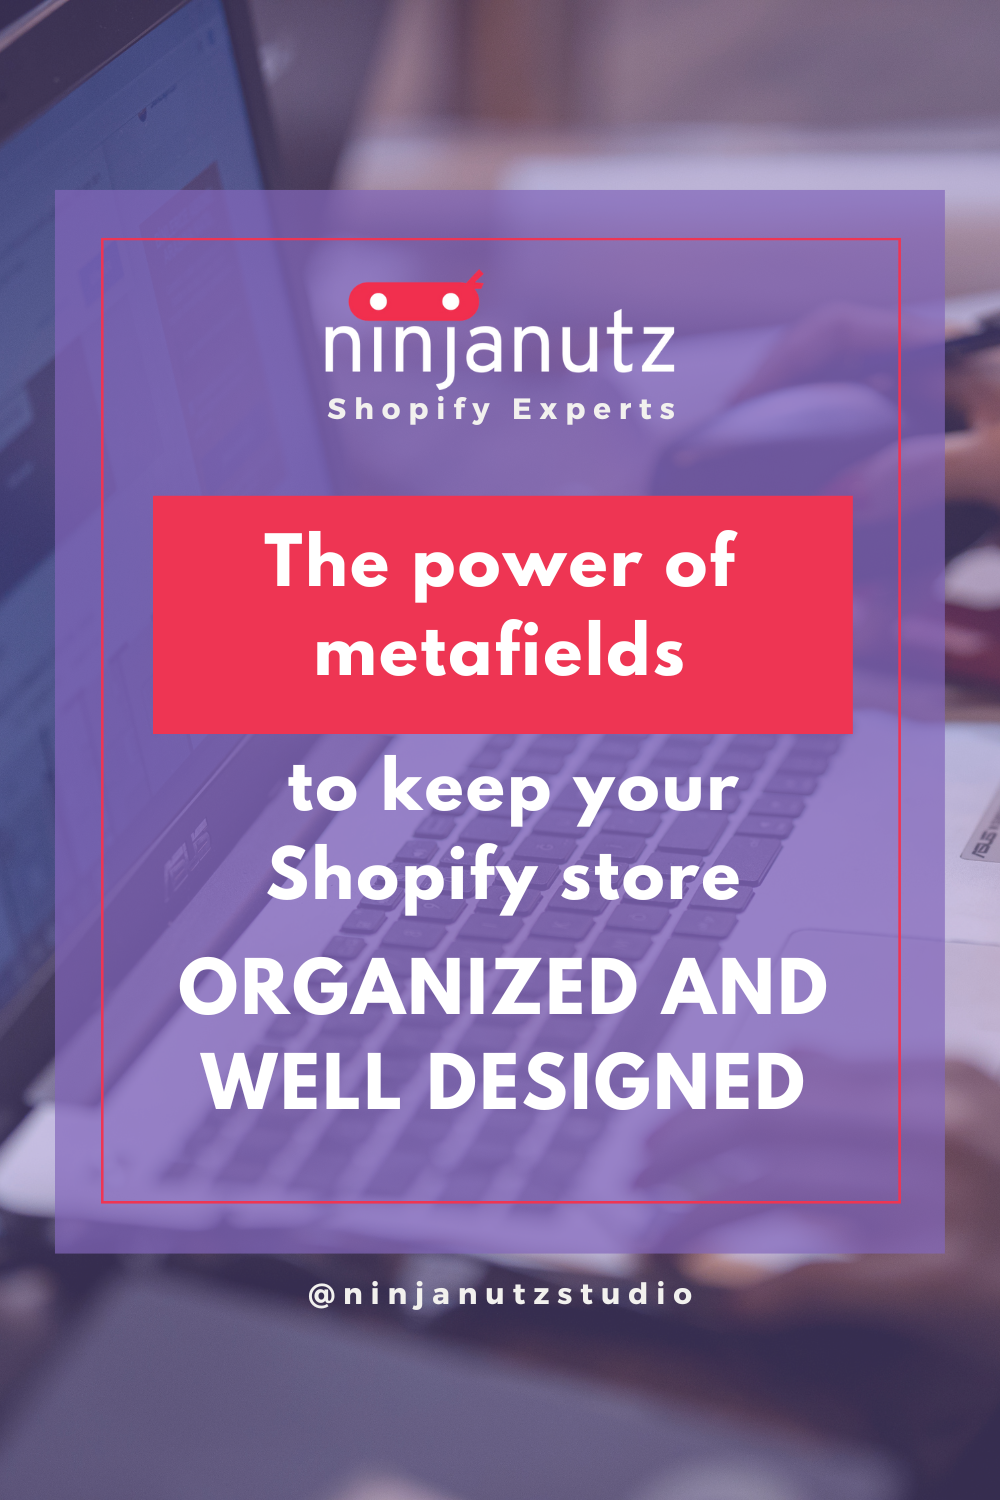 The power of metafields to keep your Shopify store organized and well designed